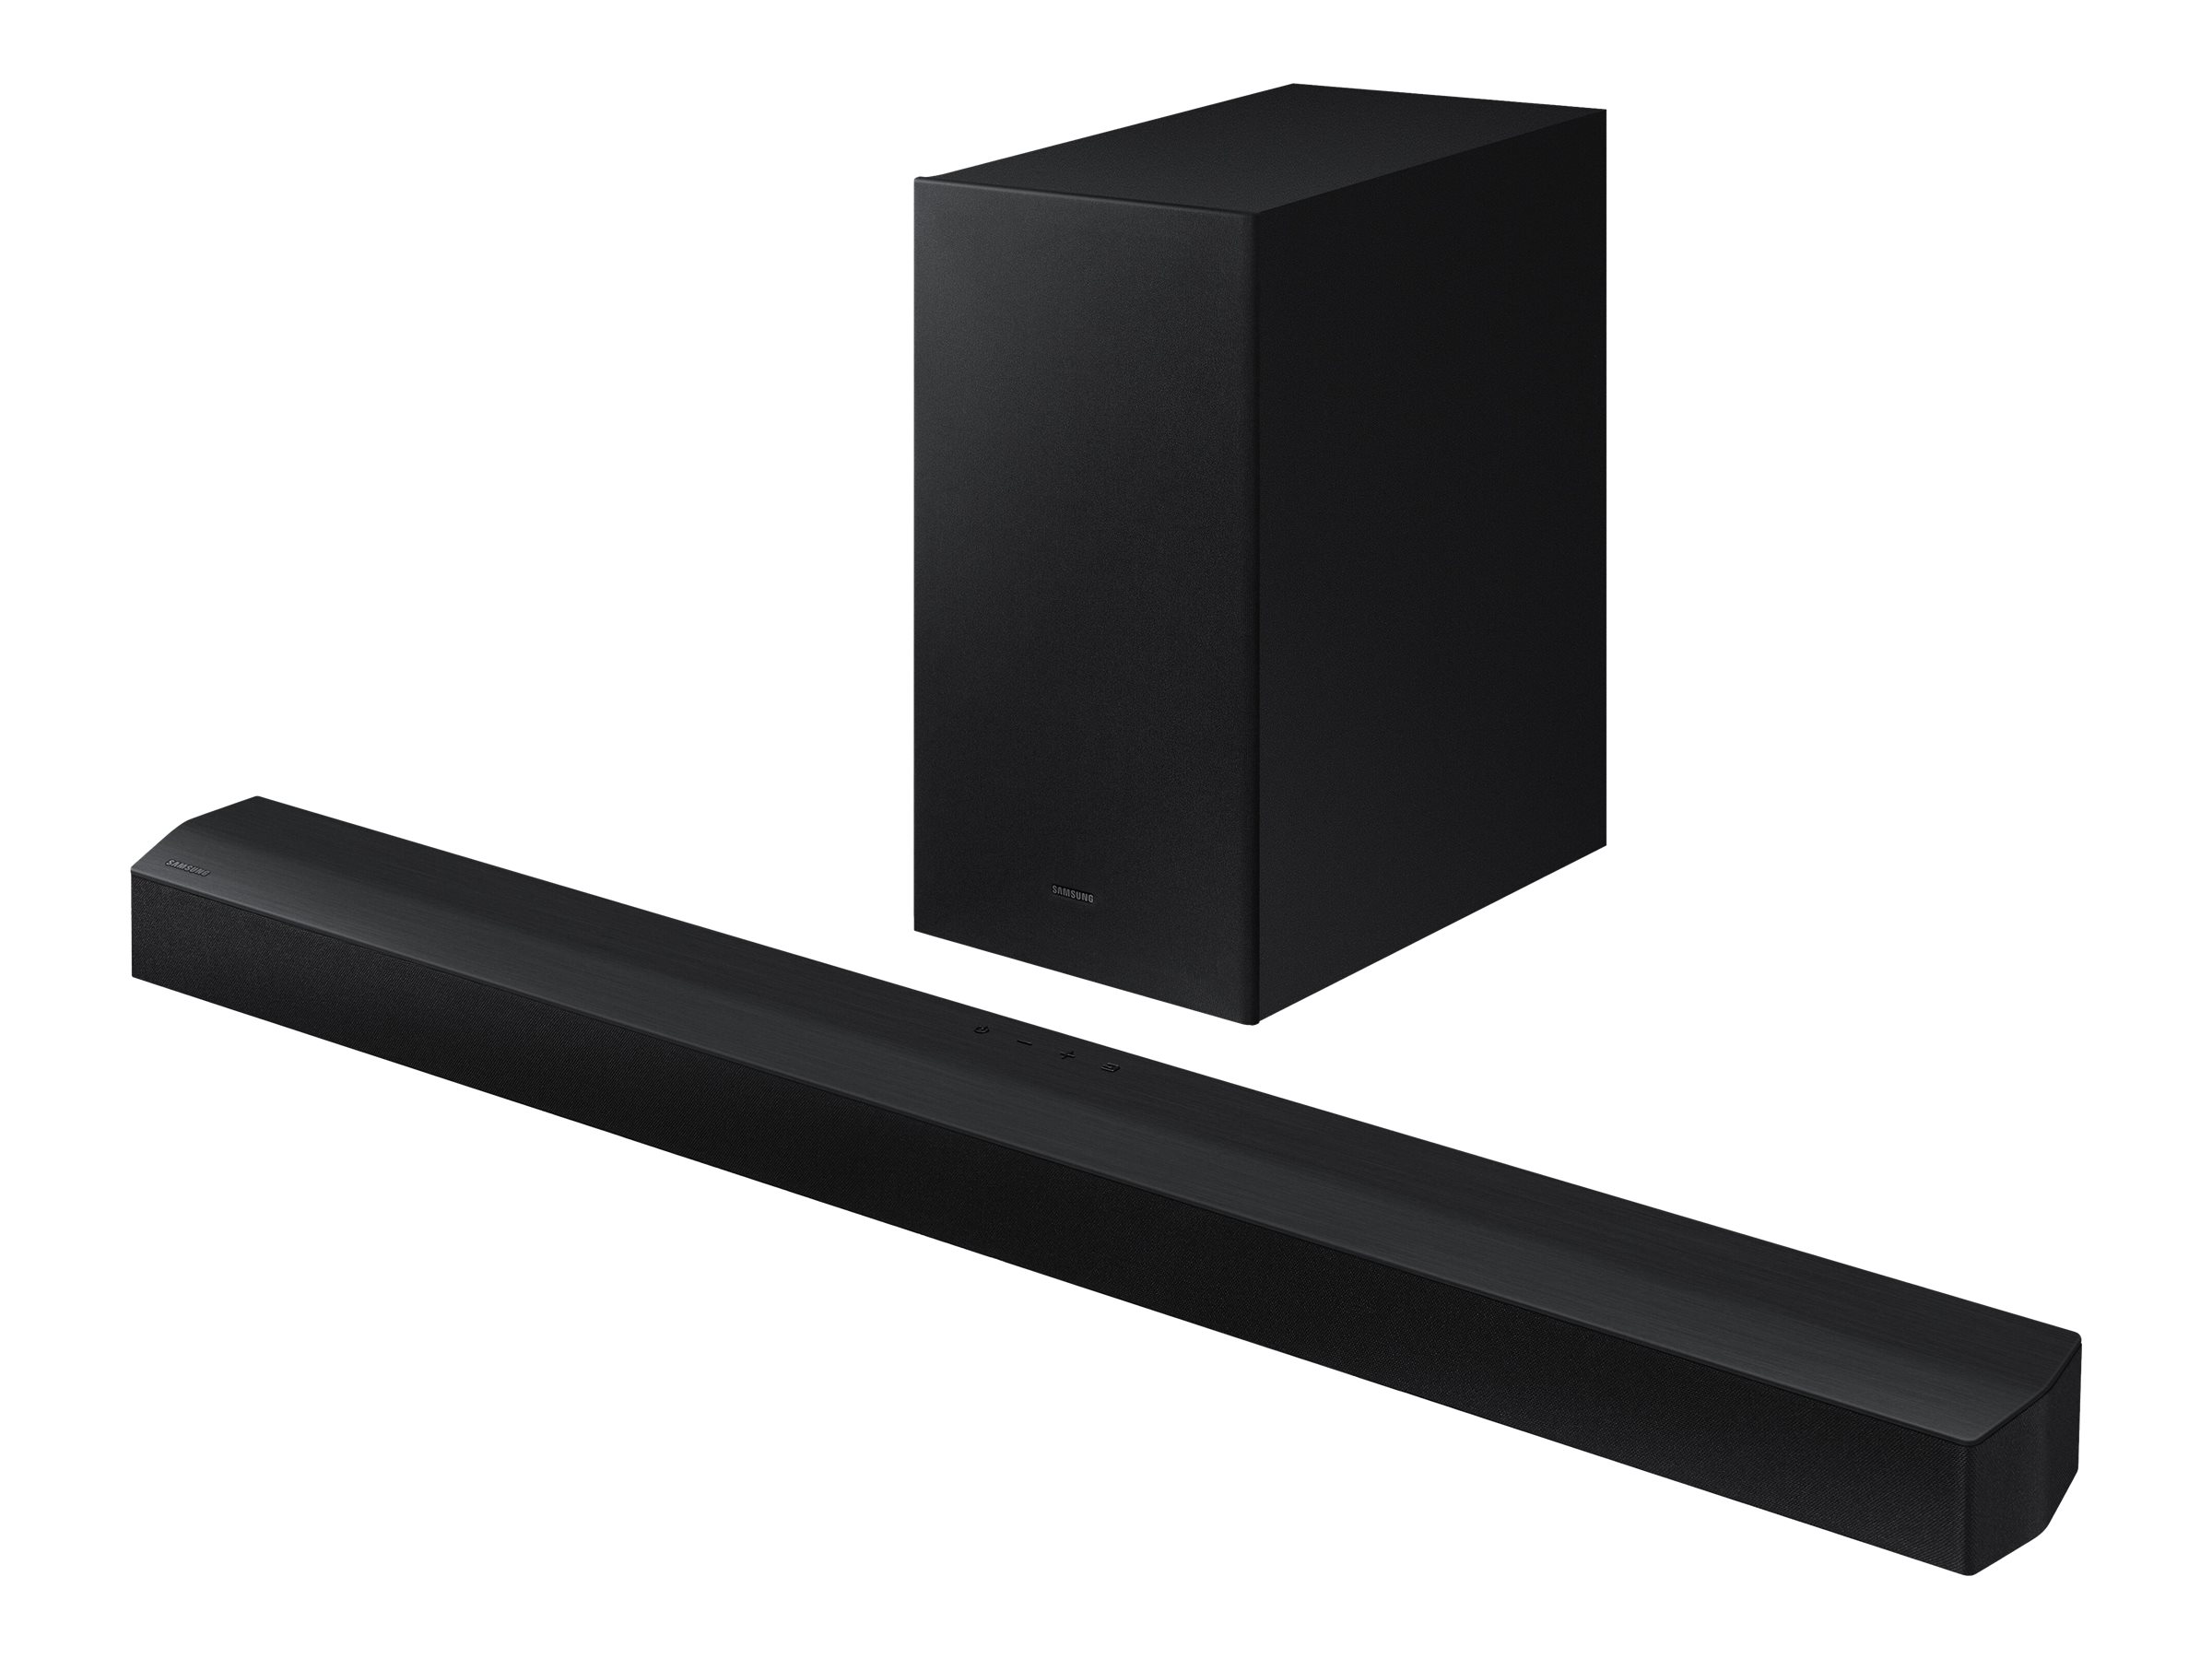 What Is a Sound Bar?